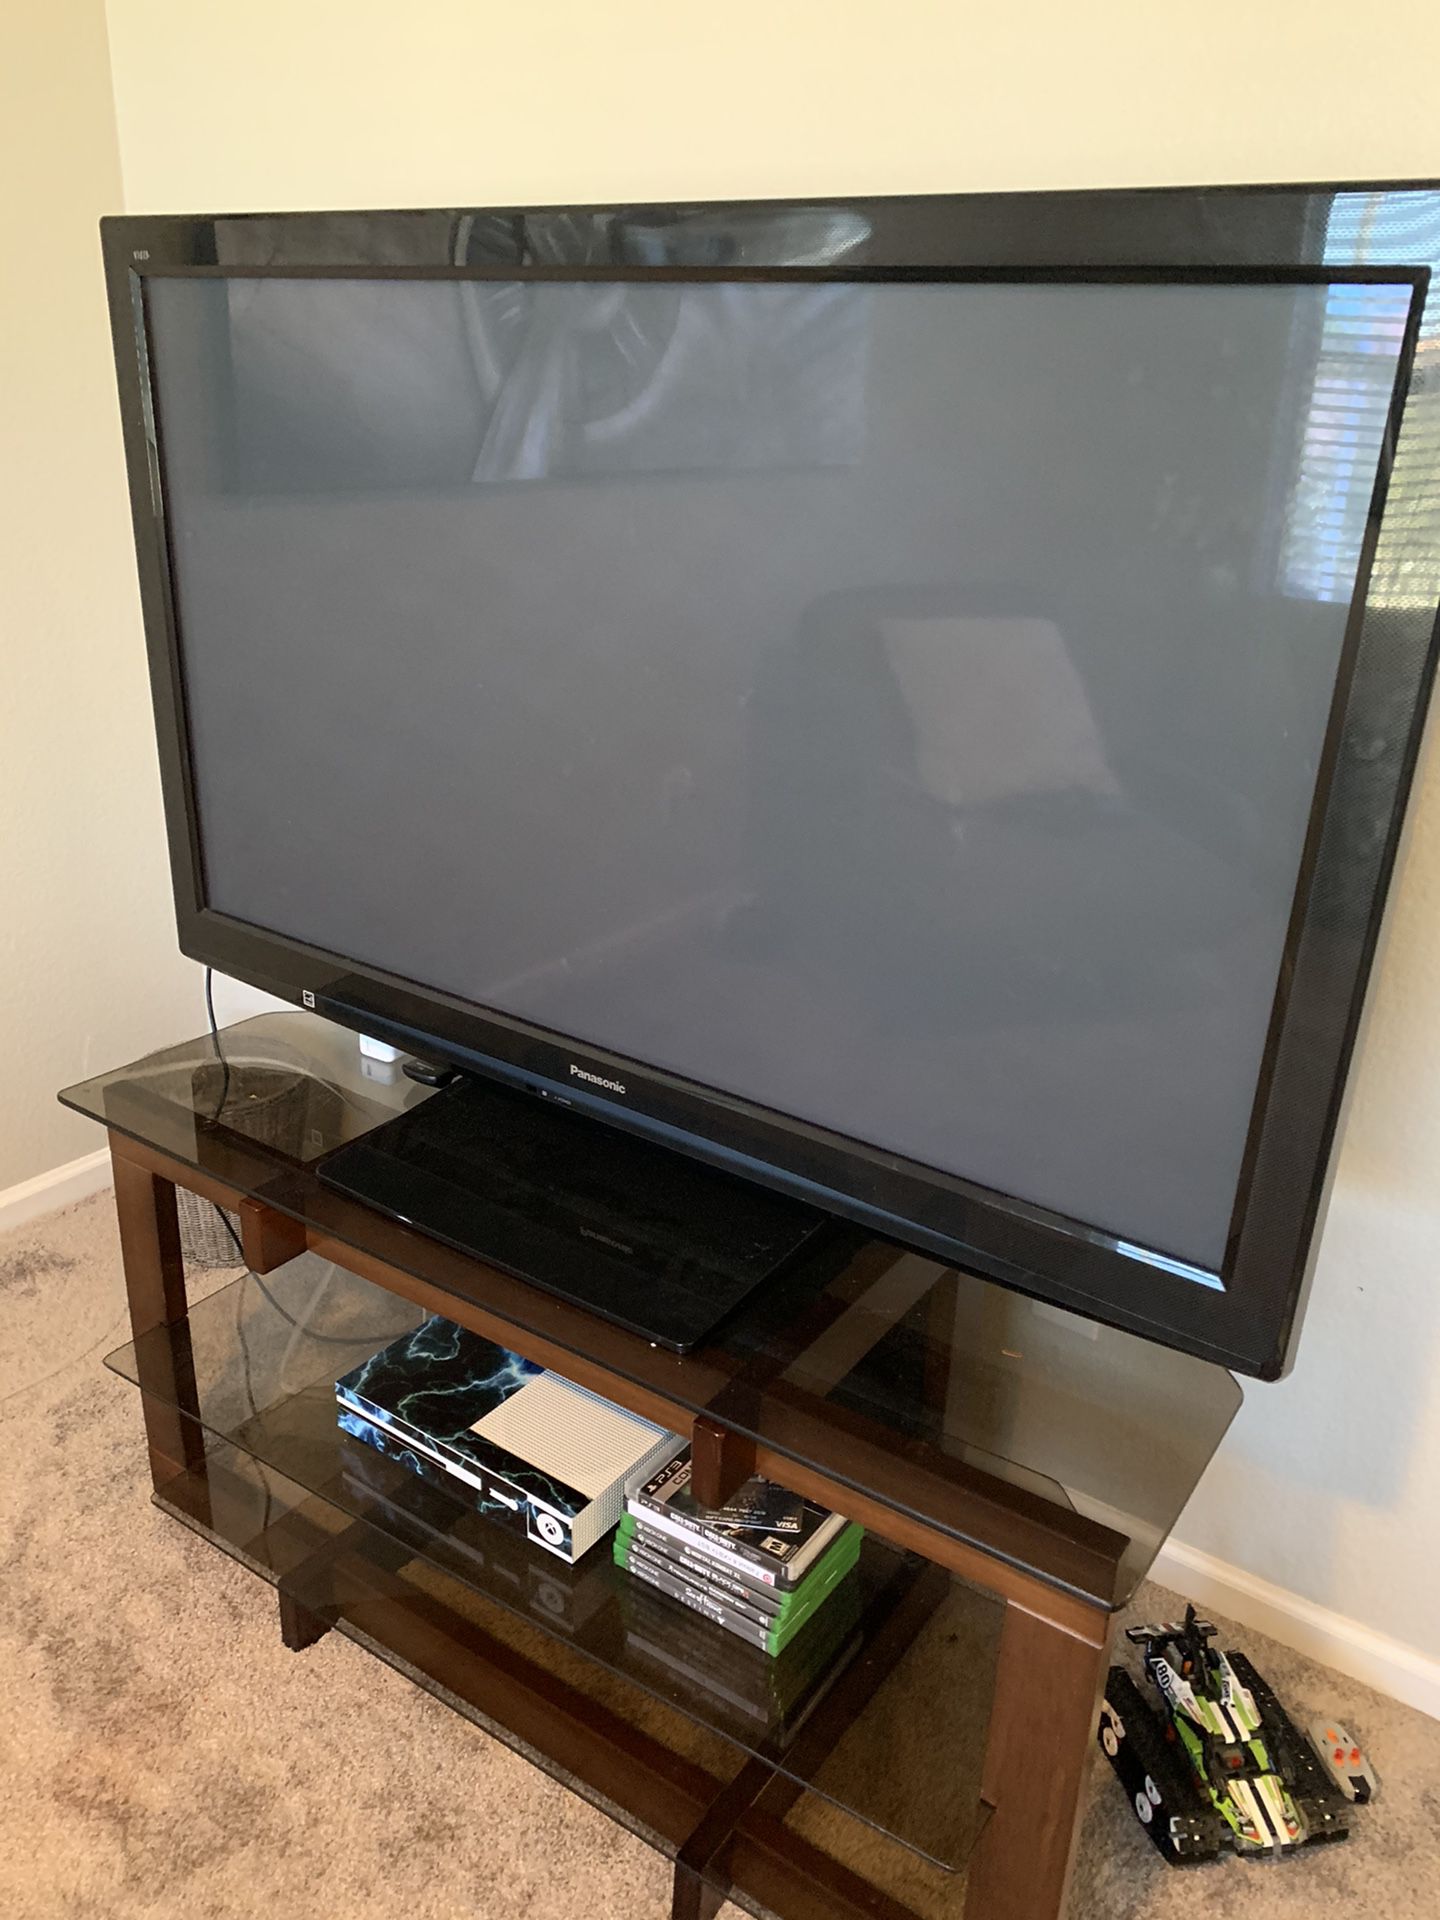 Panasonic 48” Plasma TV with remote-normal wear . Works great just bought a new TV